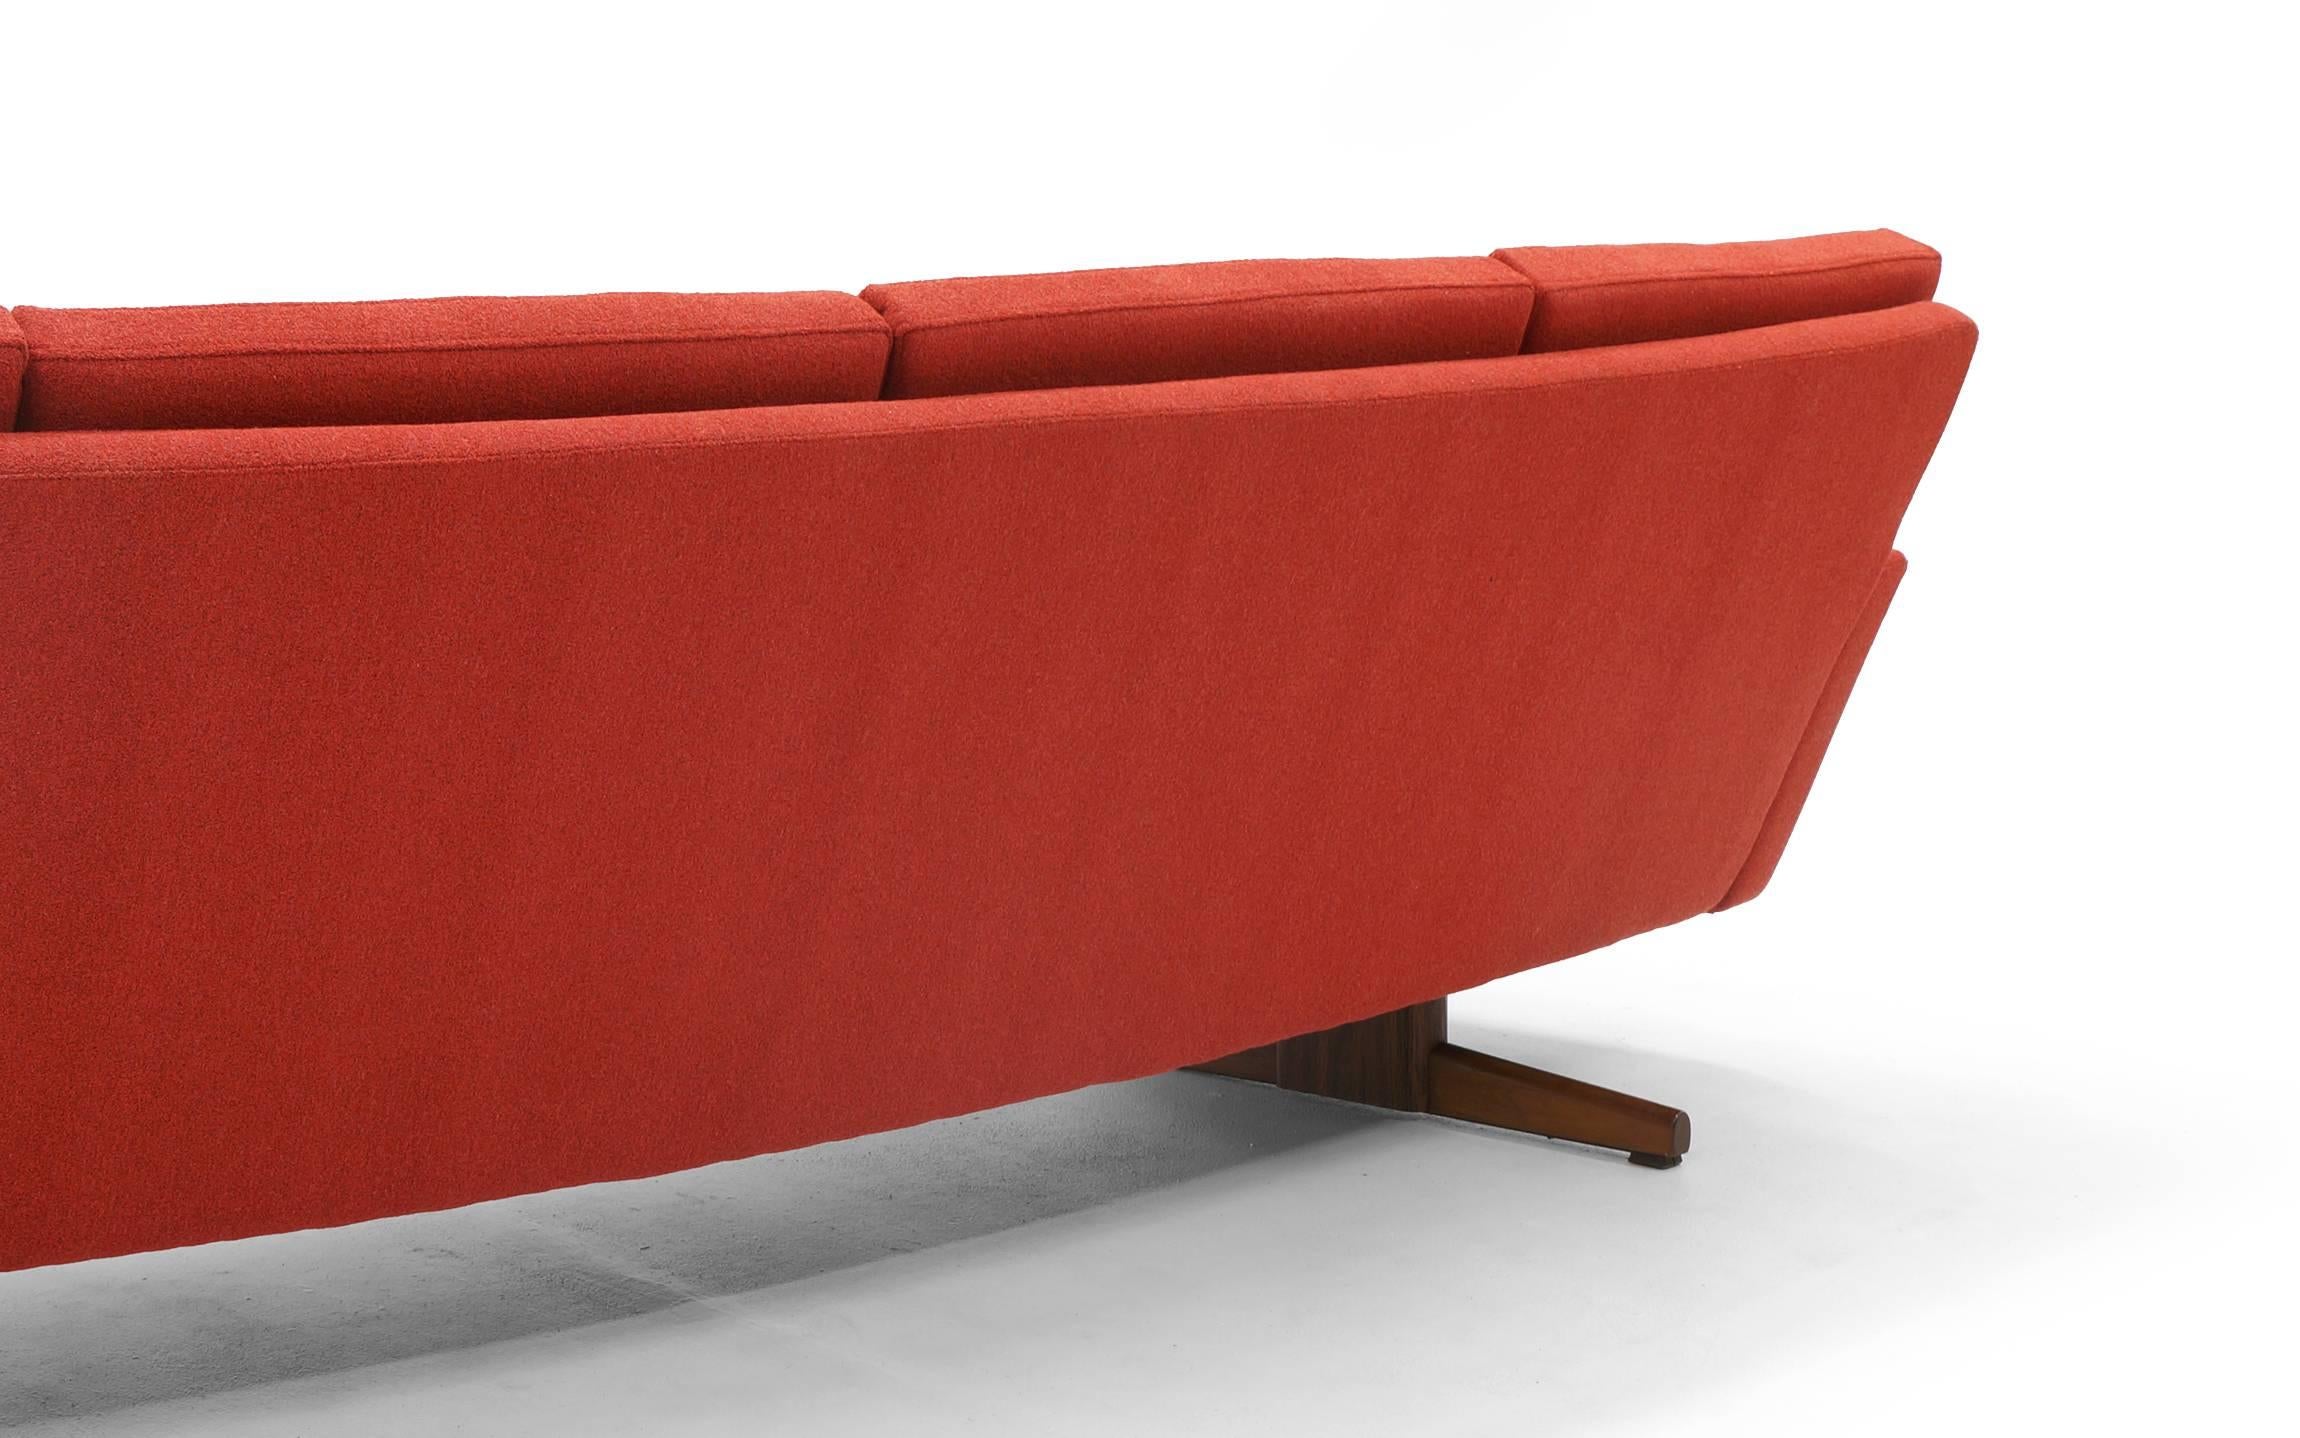 Upholstery Curved Sofa by Frederick Kayser Restored Redone in Rich Red Knoll Cuddle Cloth